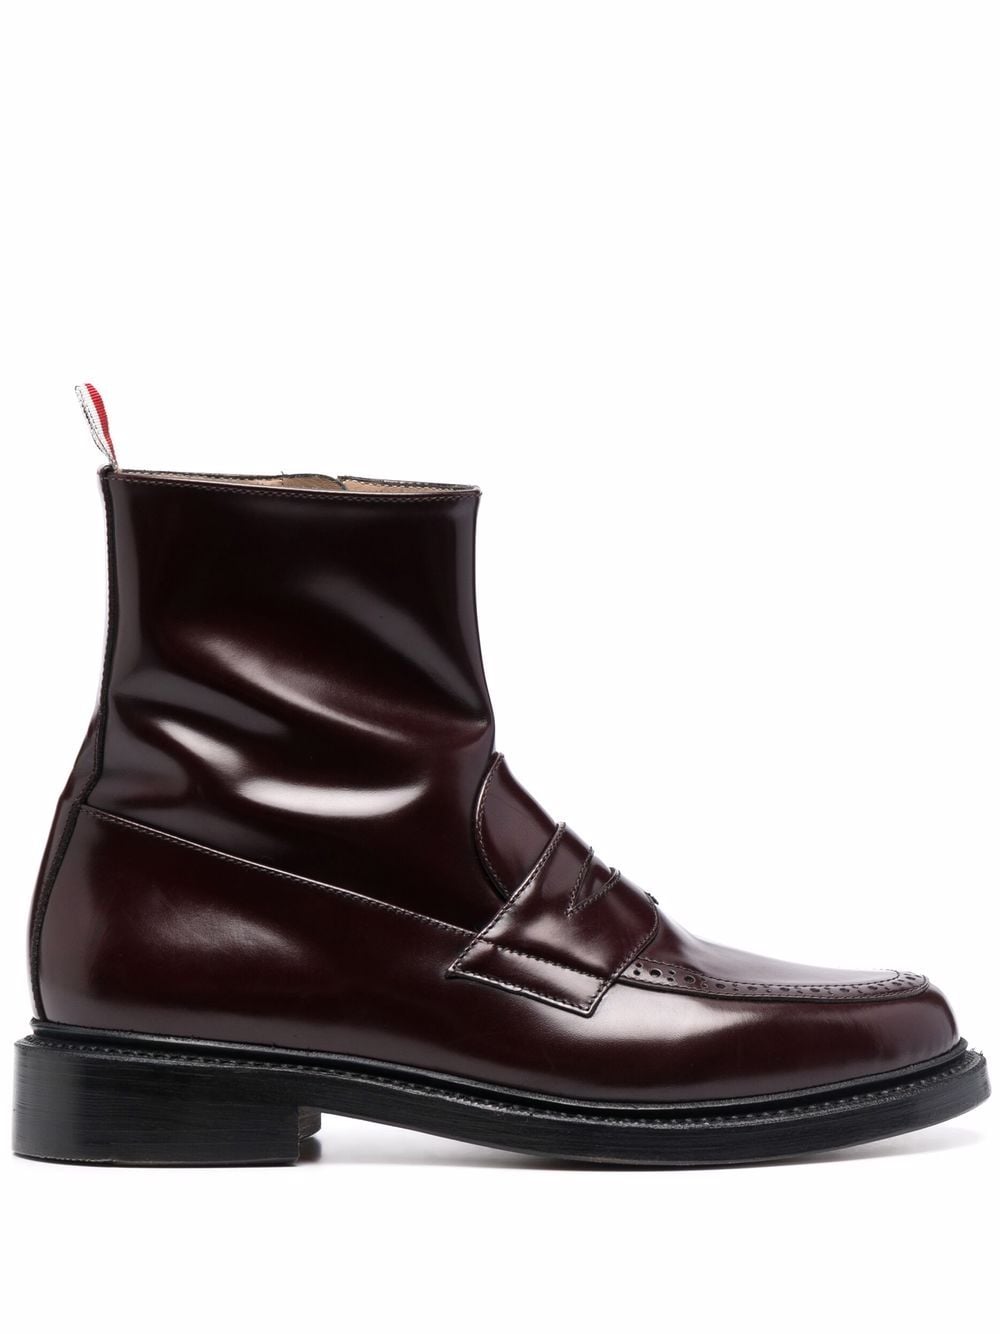 Thom Browne penny loafer ankle boots von Thom Browne